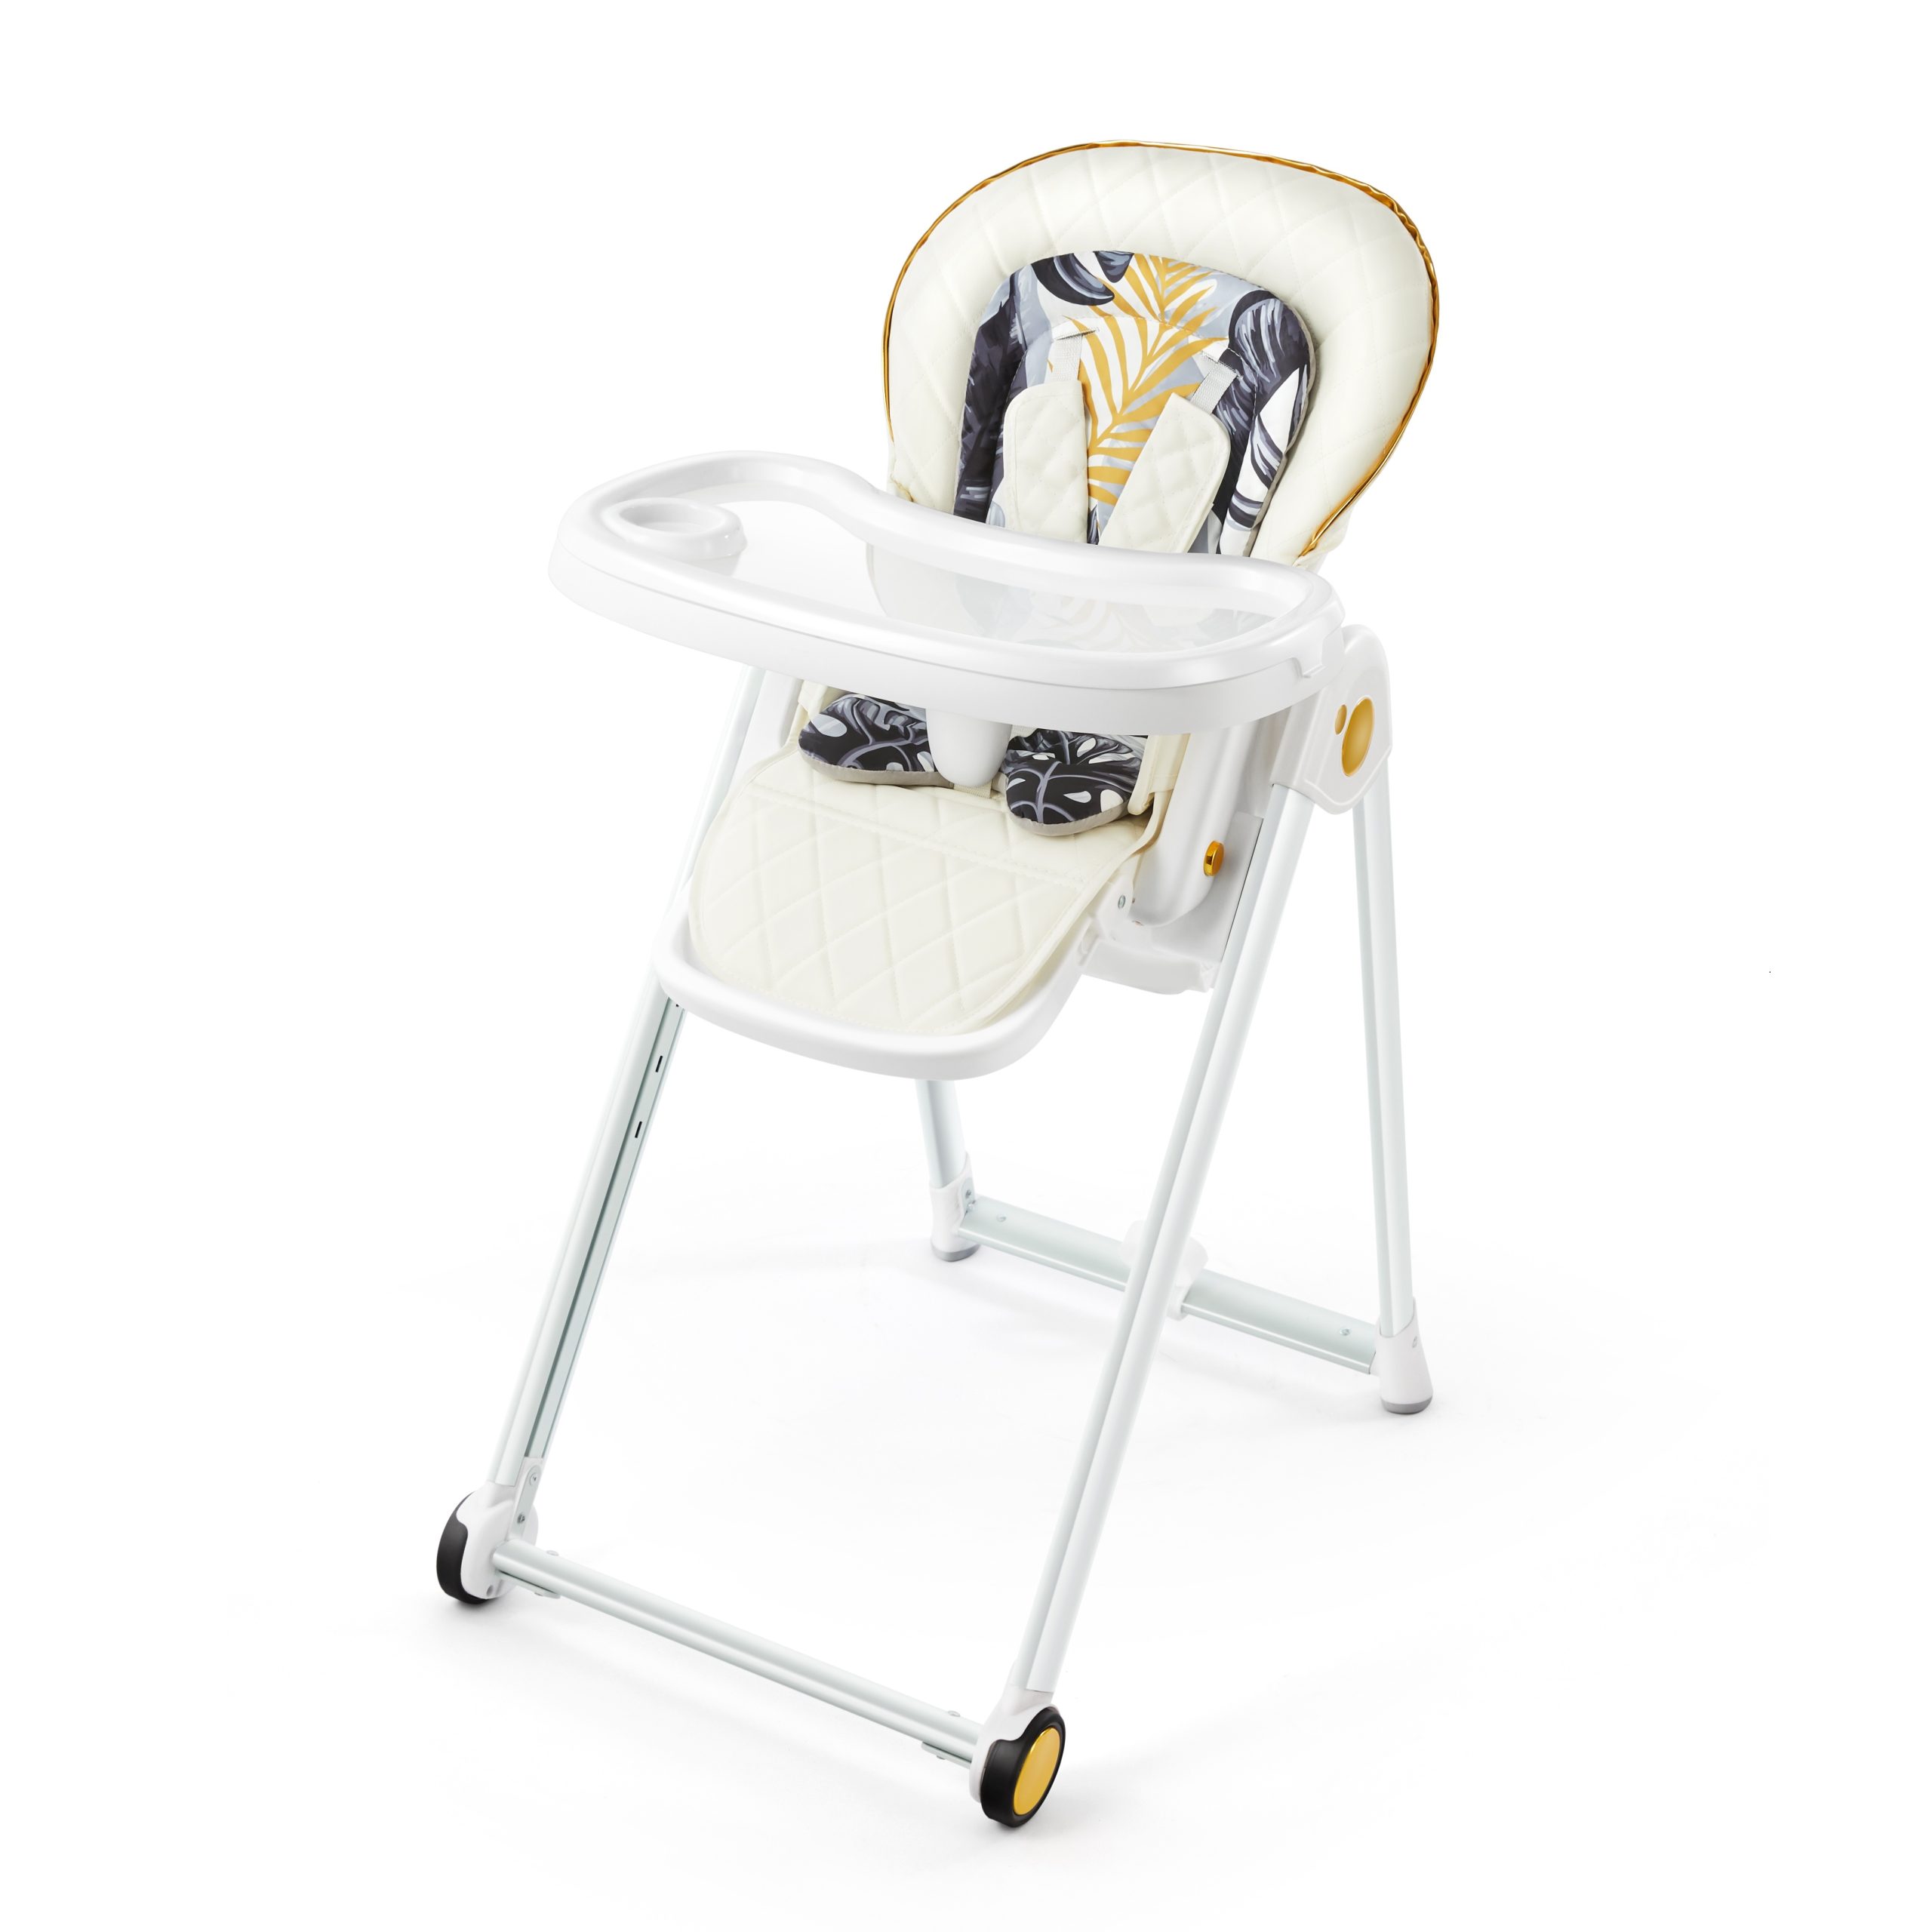 Premium Safe Eating Chair for Babies (2)